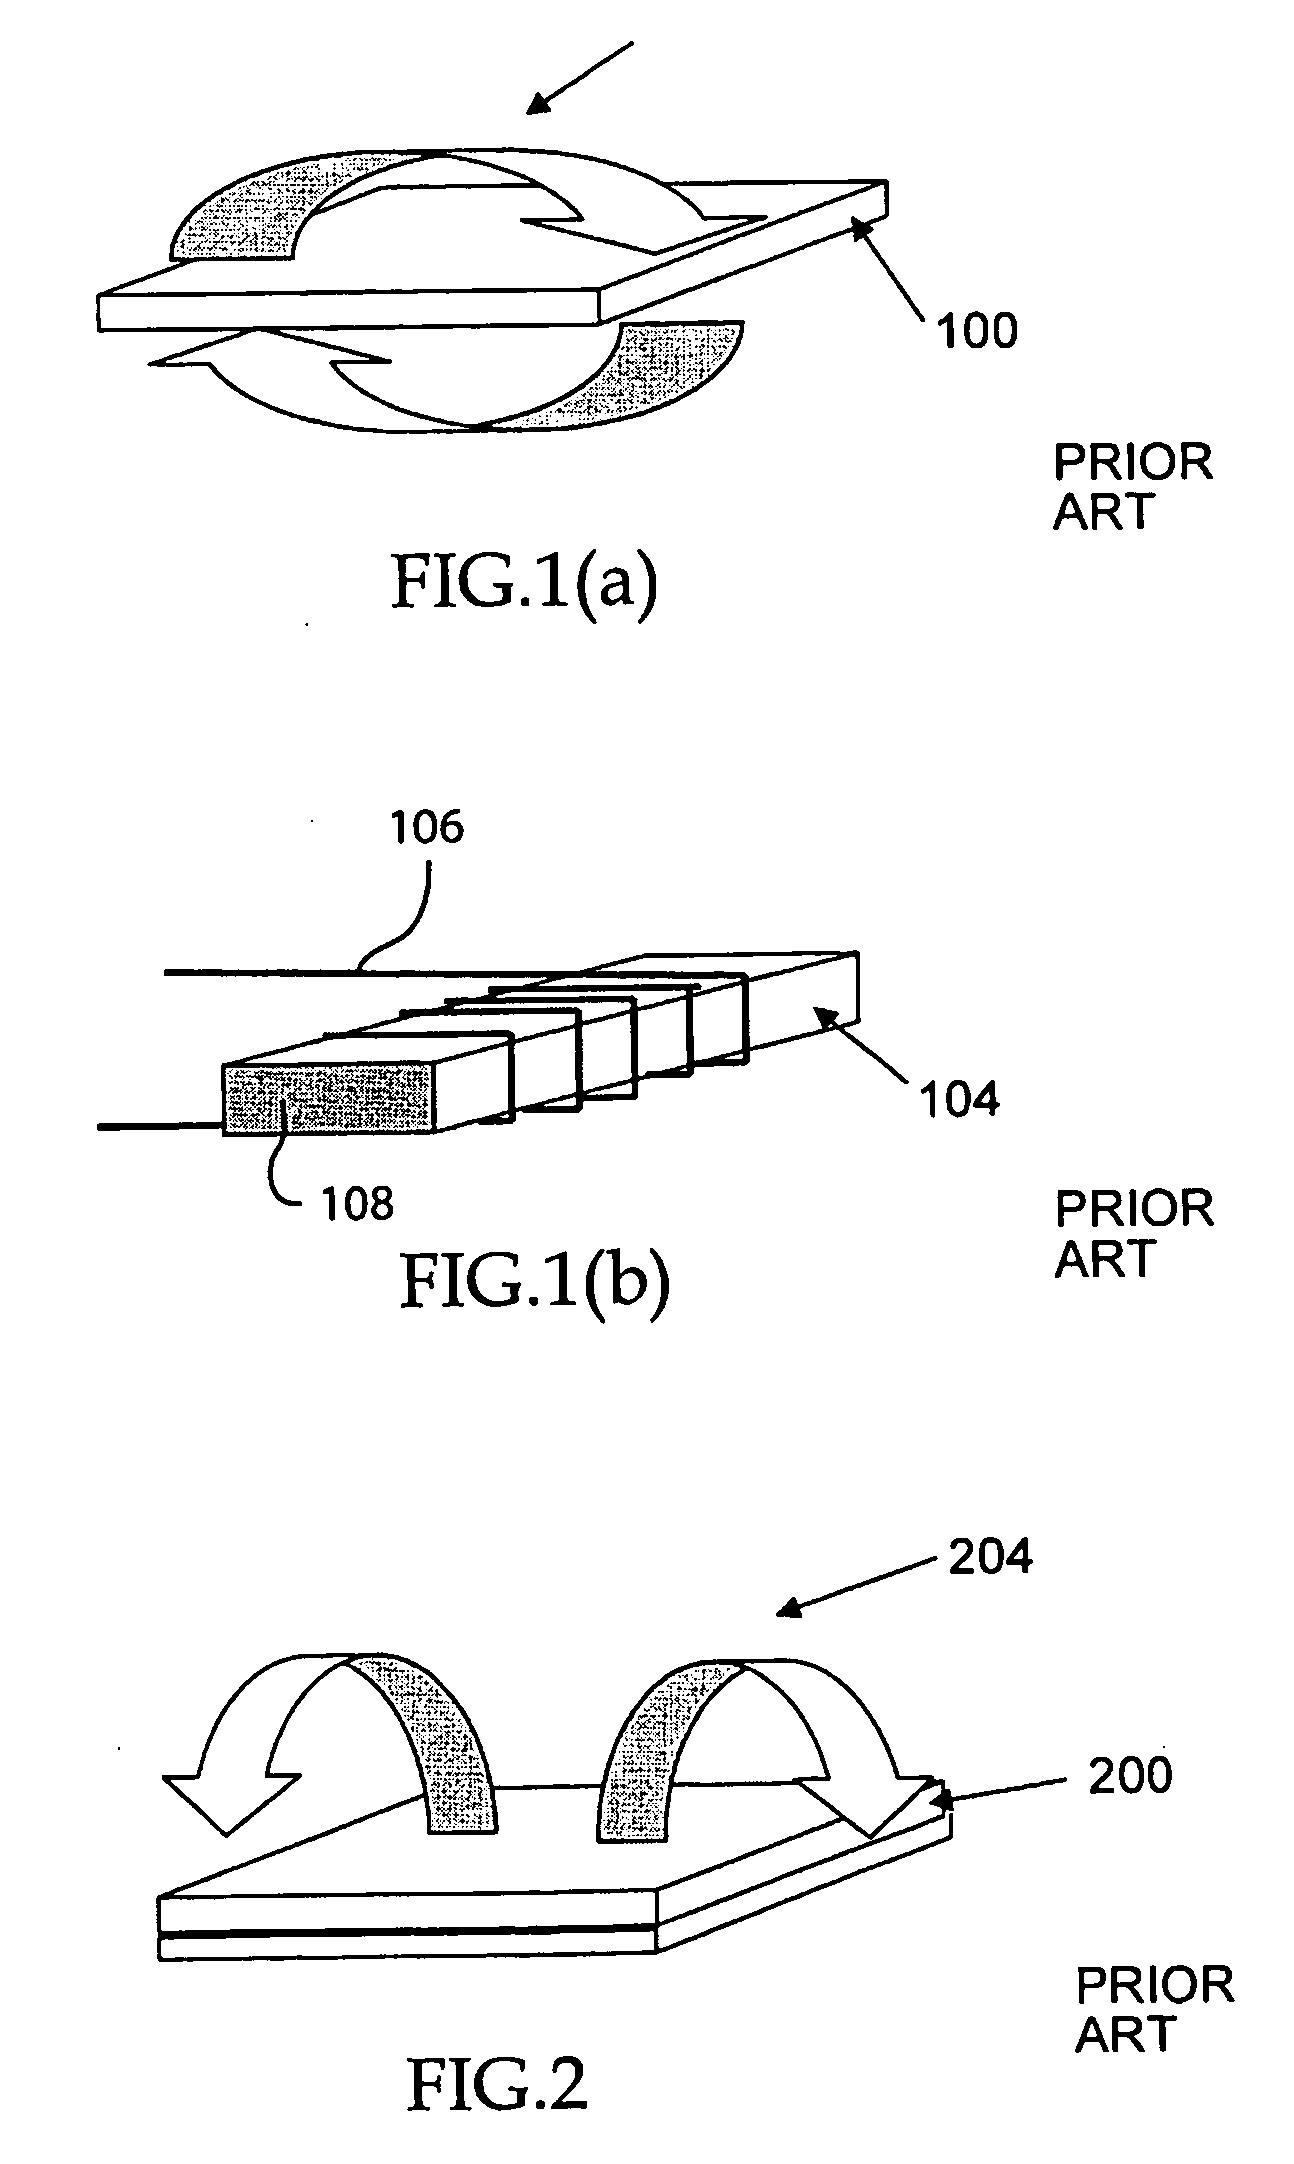 Rechargeable battery circuit and structure for compatibility with a planar inductive charging platform